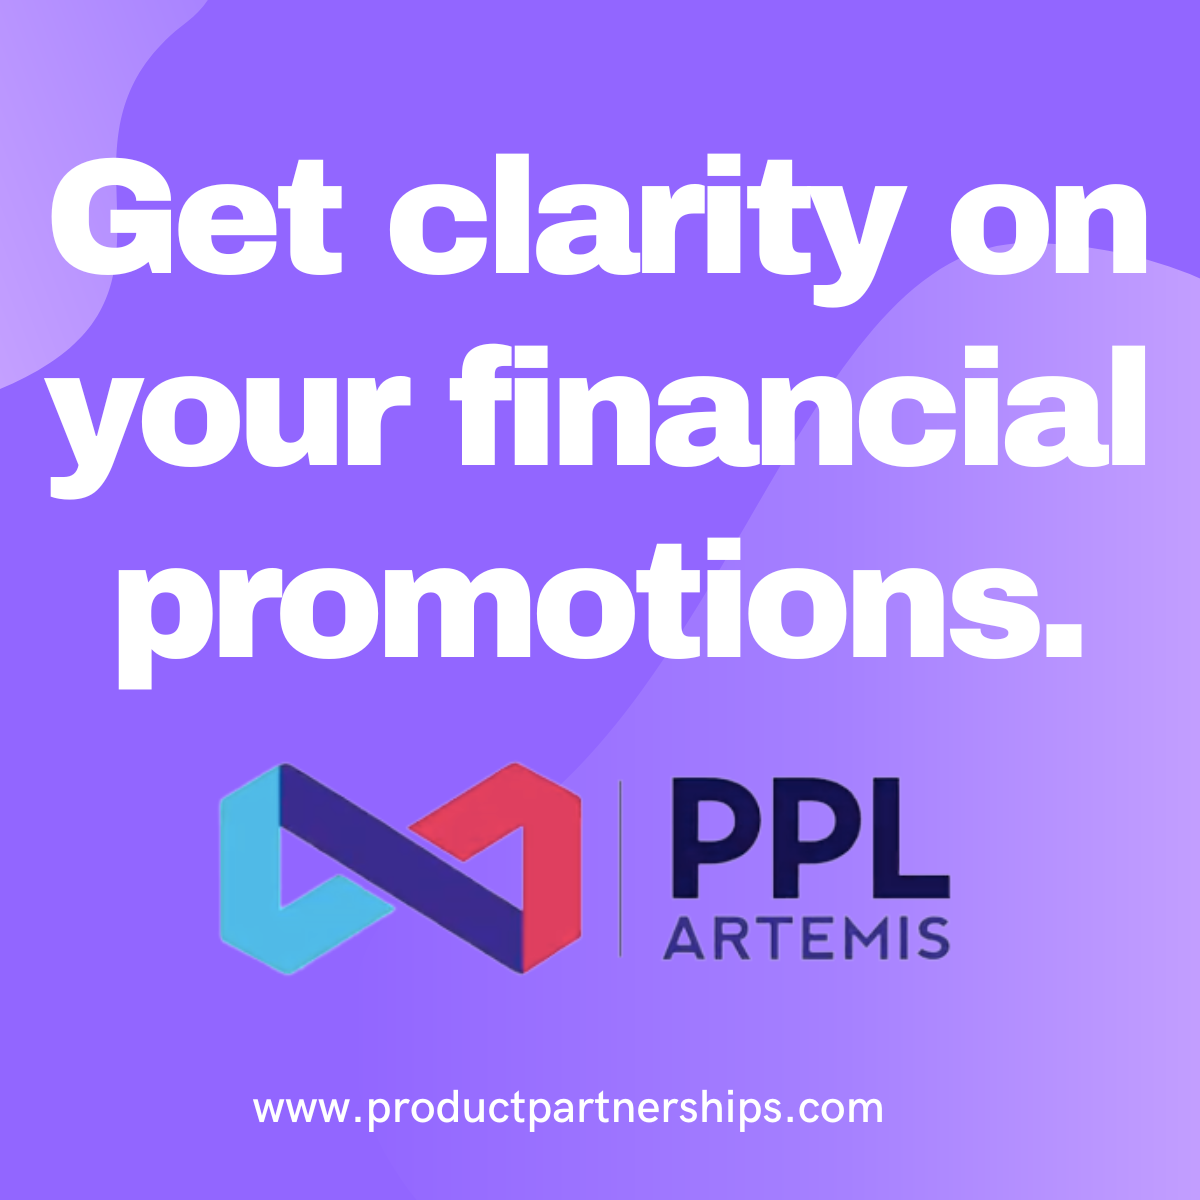 Get clarity on your financial promotions